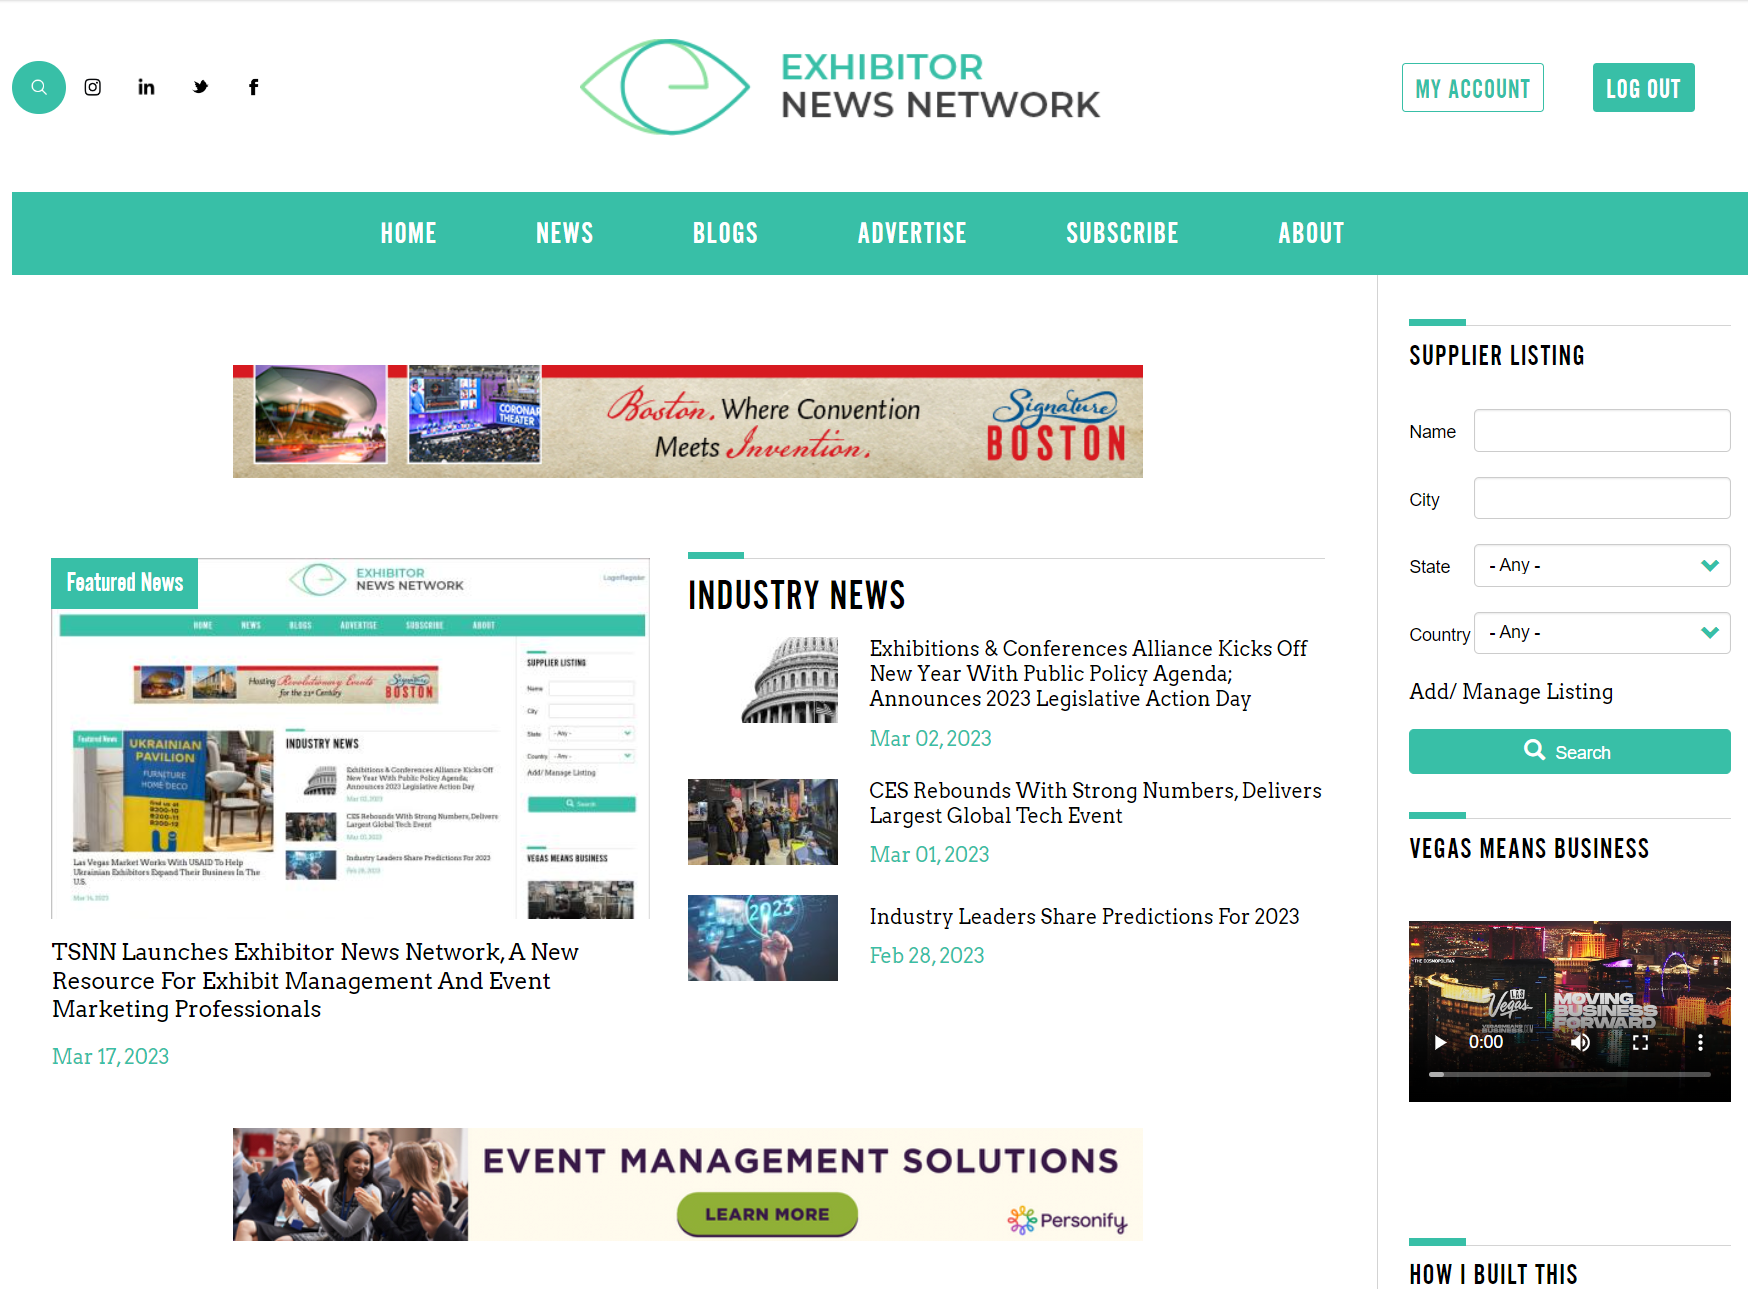 TSNN Launches Exhibitor News Network, a New Resource for Exhibit Management and Event Marketing Professionals